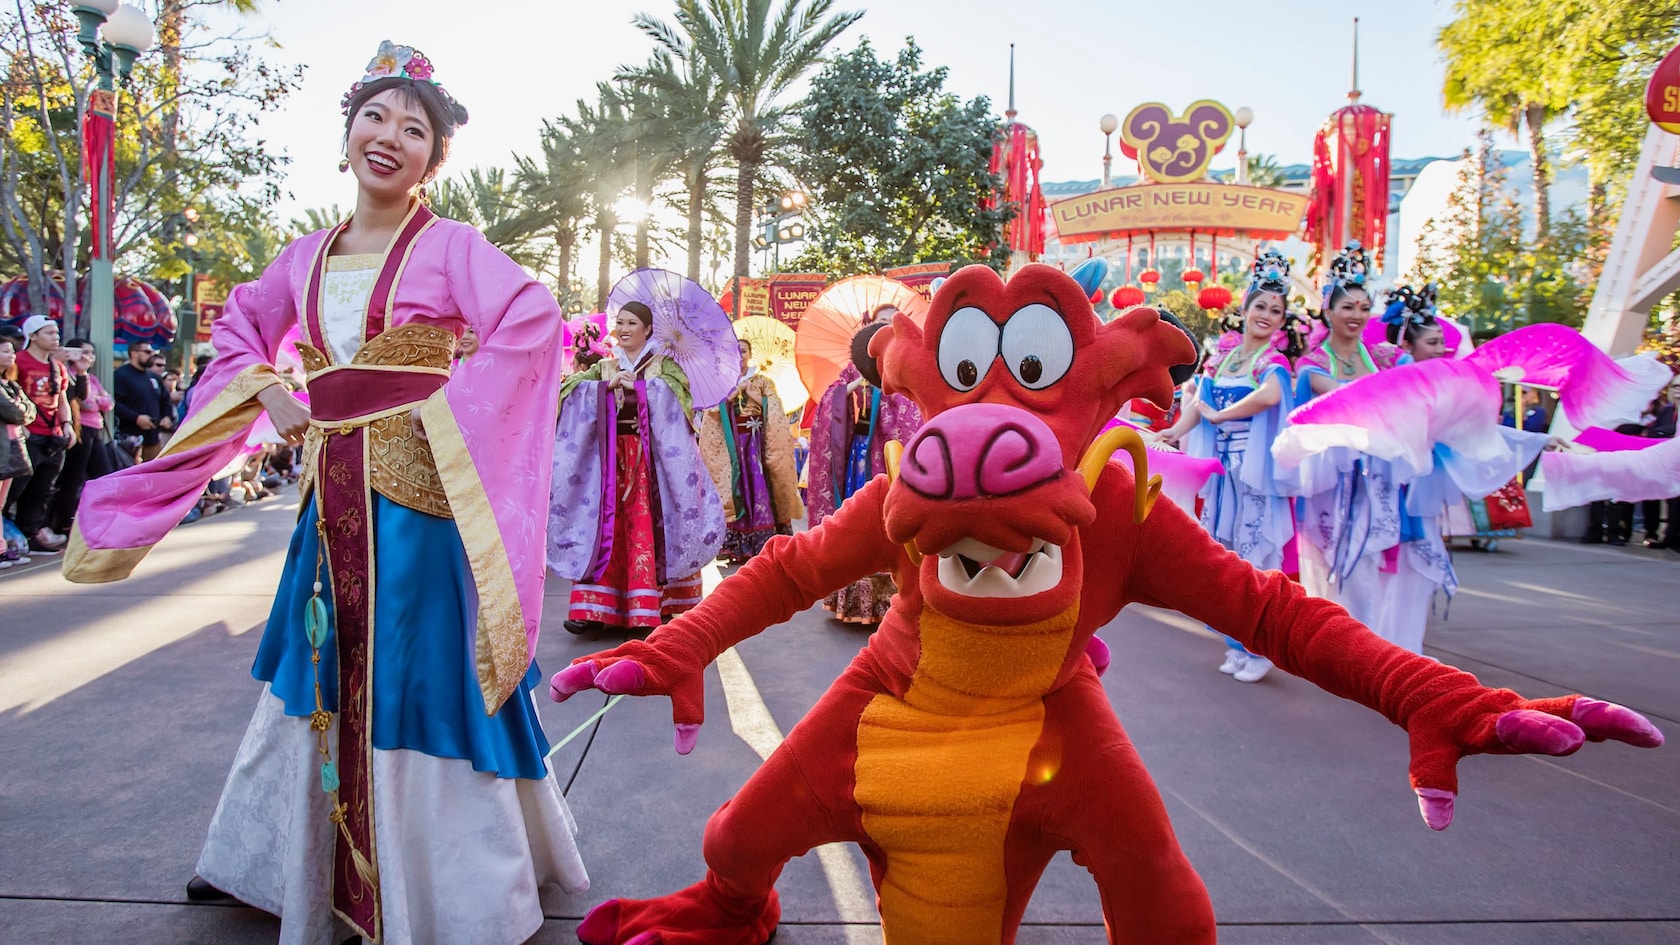 Mulan's New Year Procession with Mulan, costumed performers and a Chinese dragon puppet.